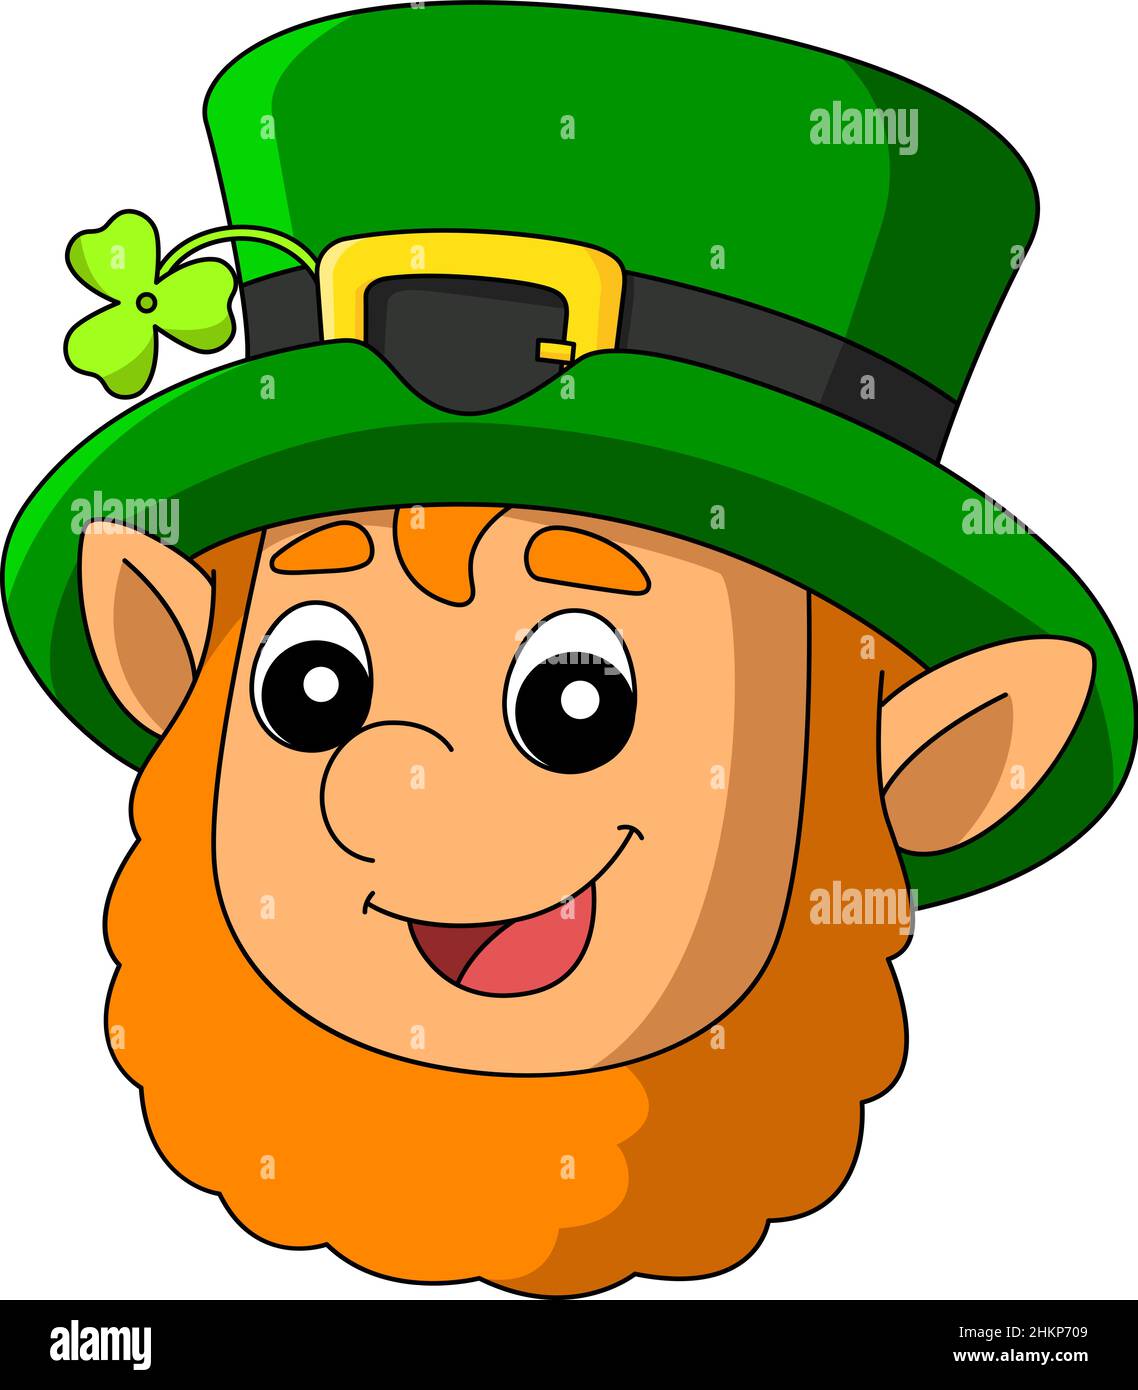 Animated St Patrick's Day Poster Email Backgrounds